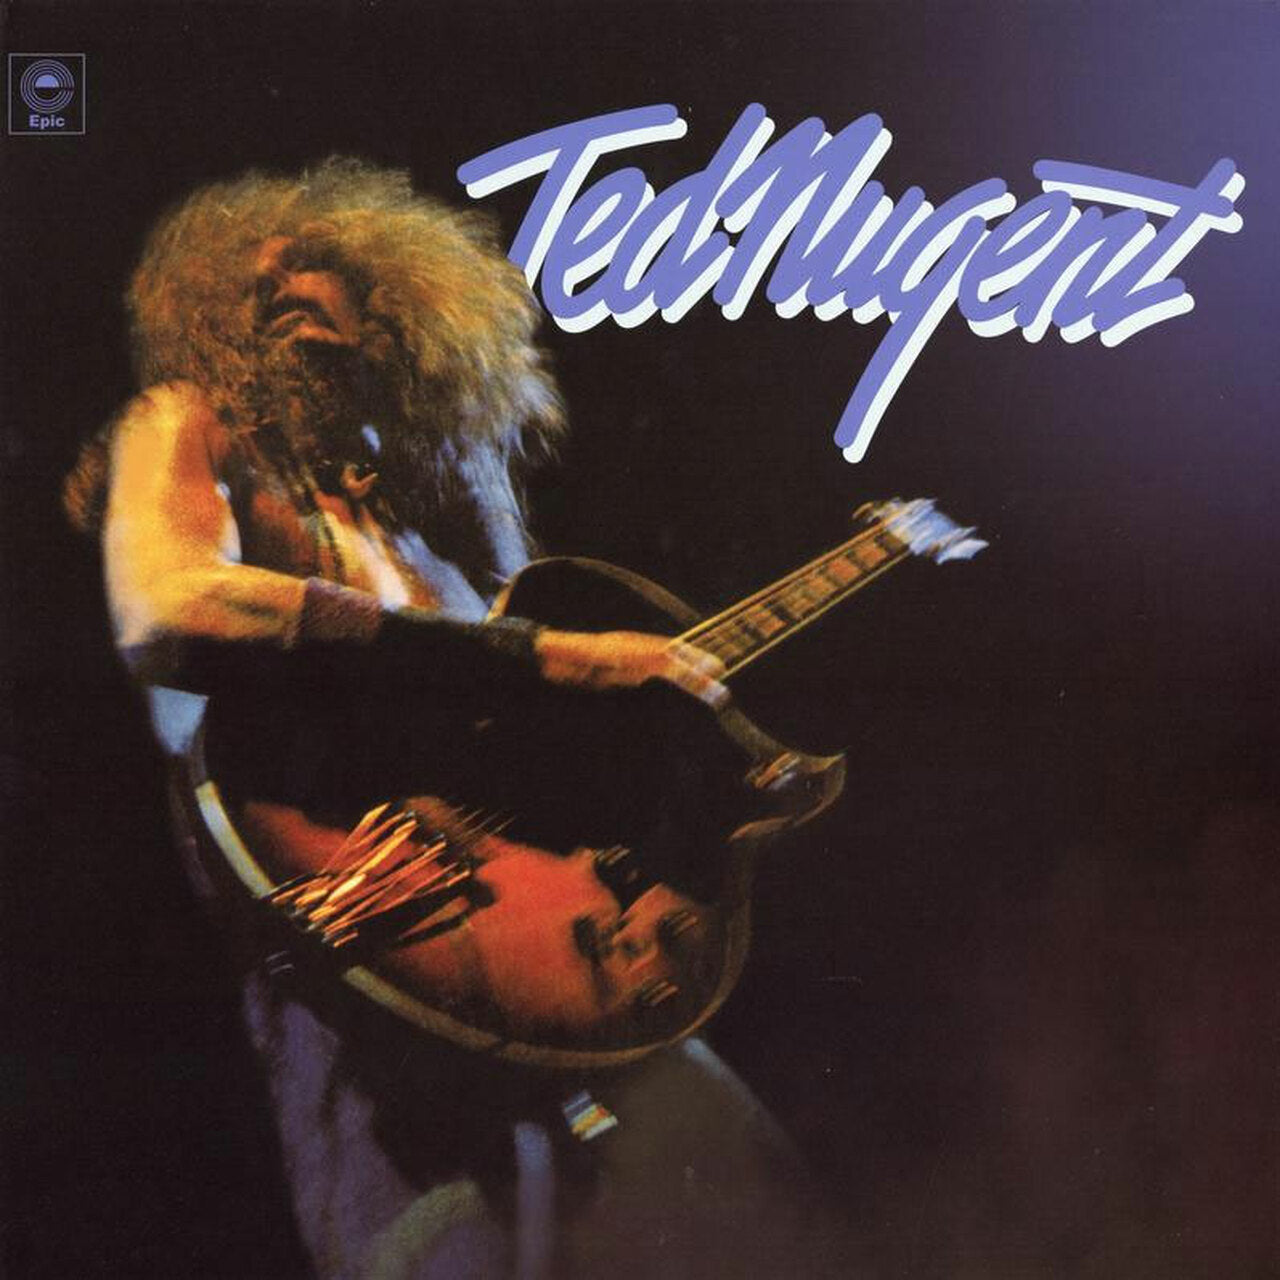 Ted Nugent | Ted Nugent